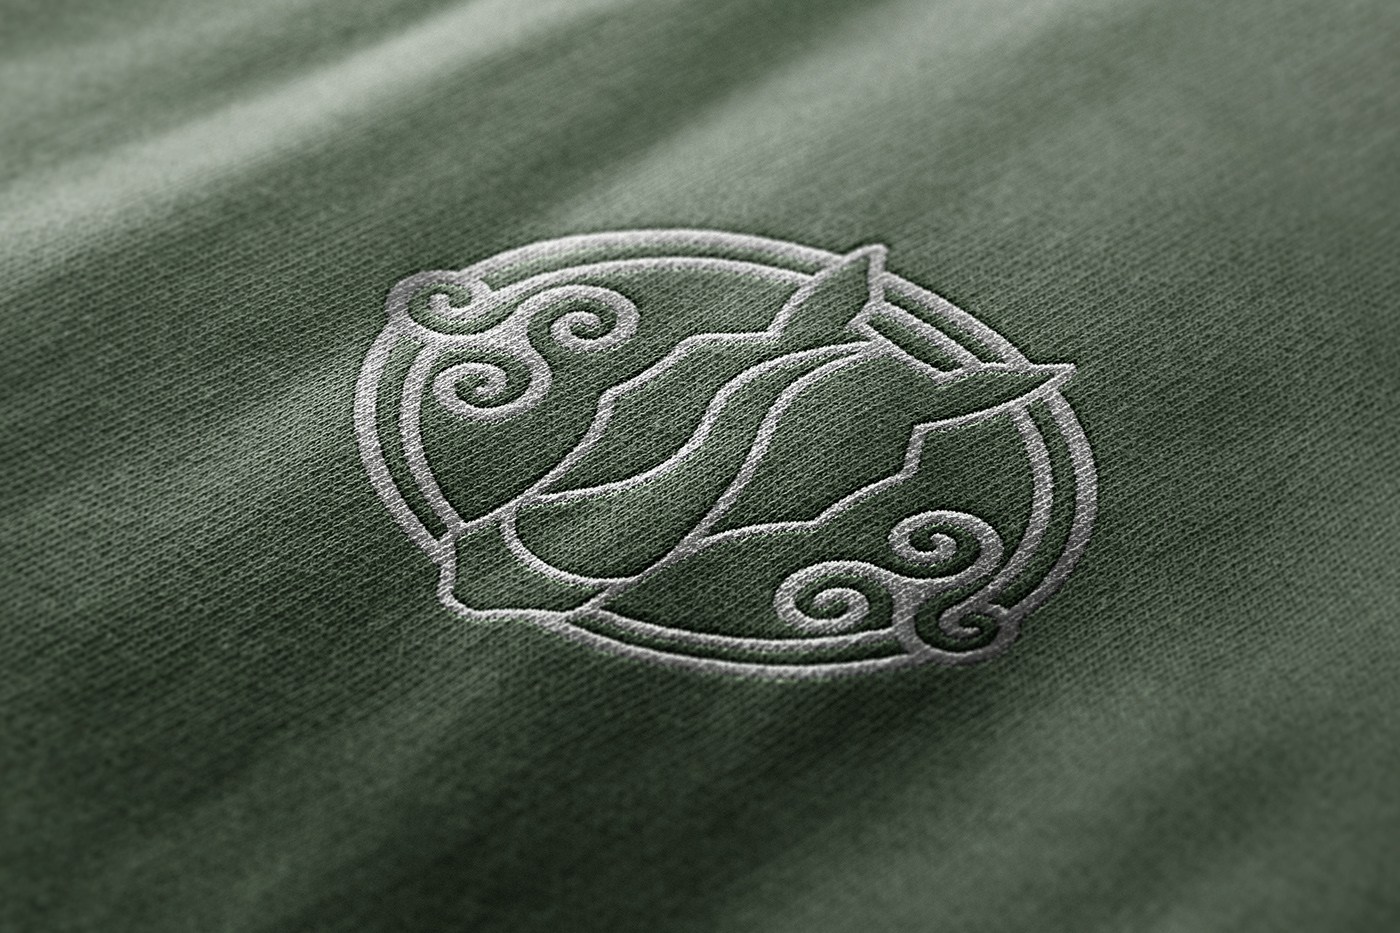 Close-up detail of The Pony Way logo embroidered on a green t-shirt